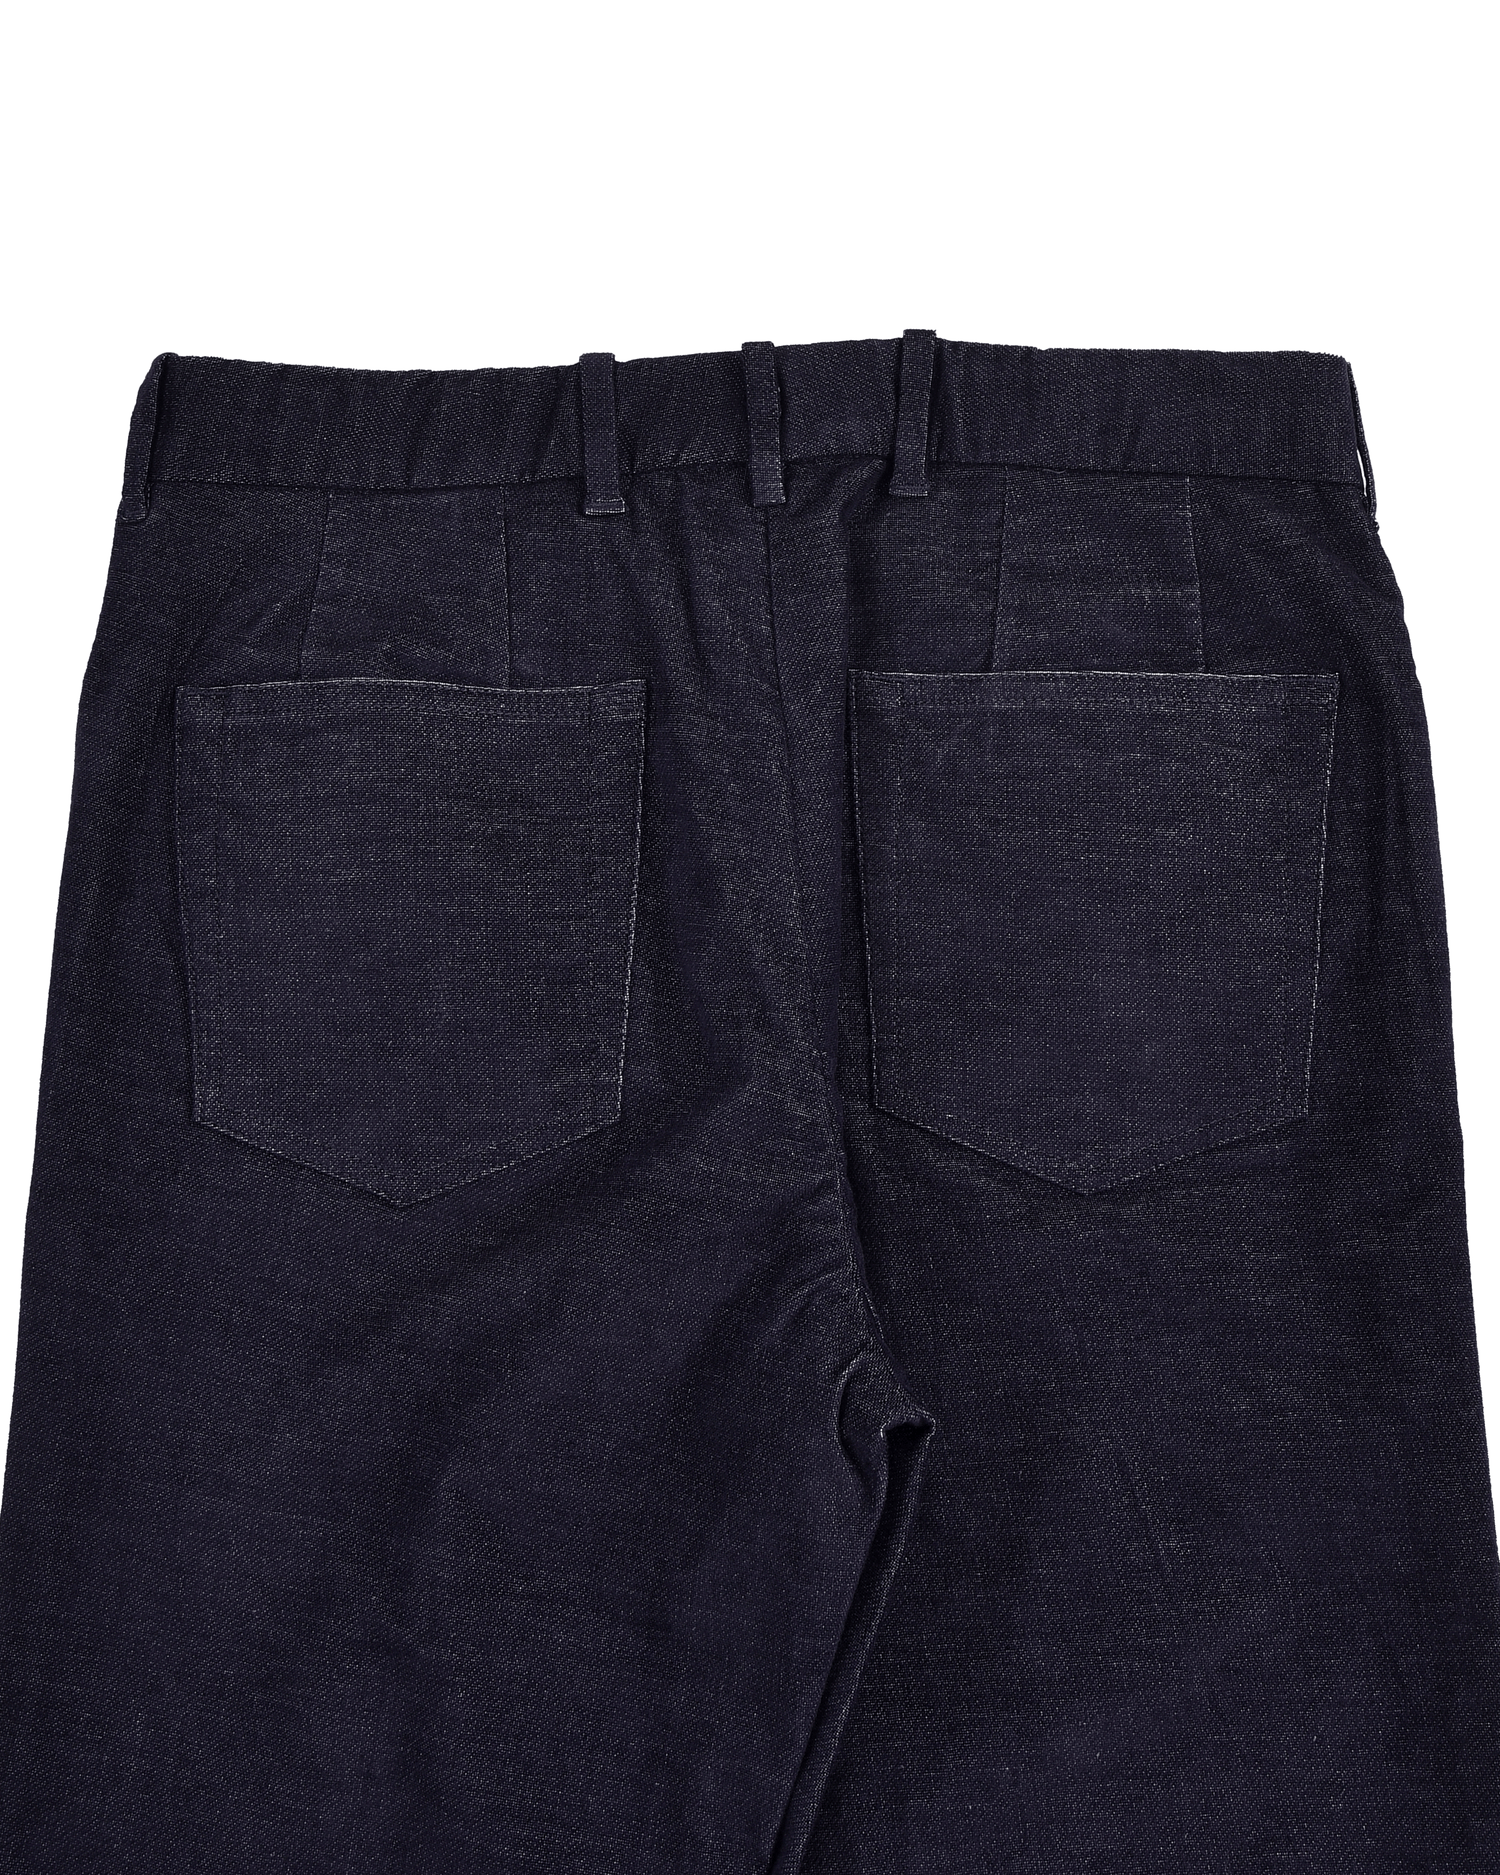 Back view of 4-way stretch jeans for men by Luxire in indigo